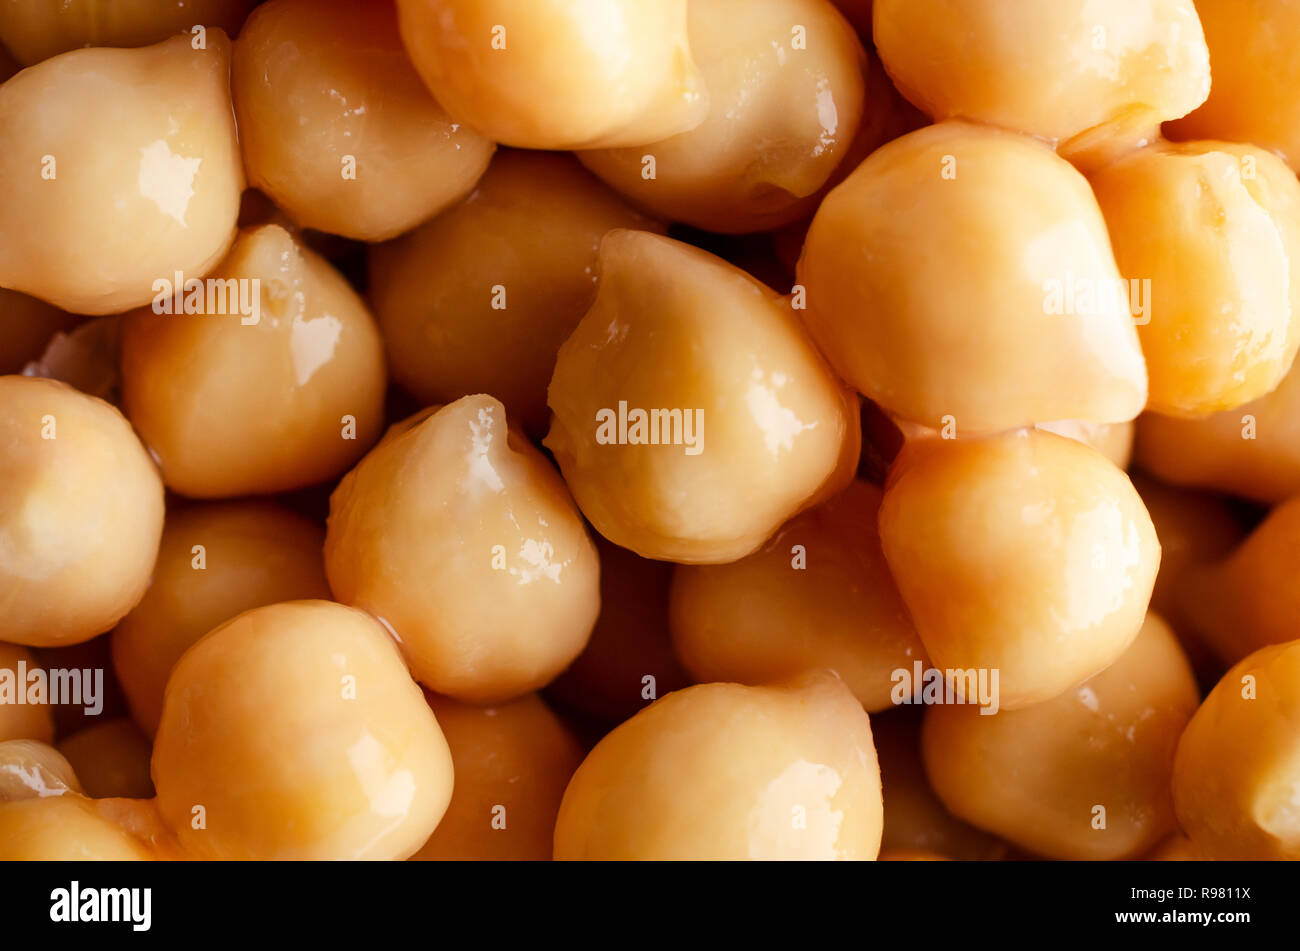 Close up of chickpeas (garbanzo beans), drained and wet, filling frame as food background. Stock Photo